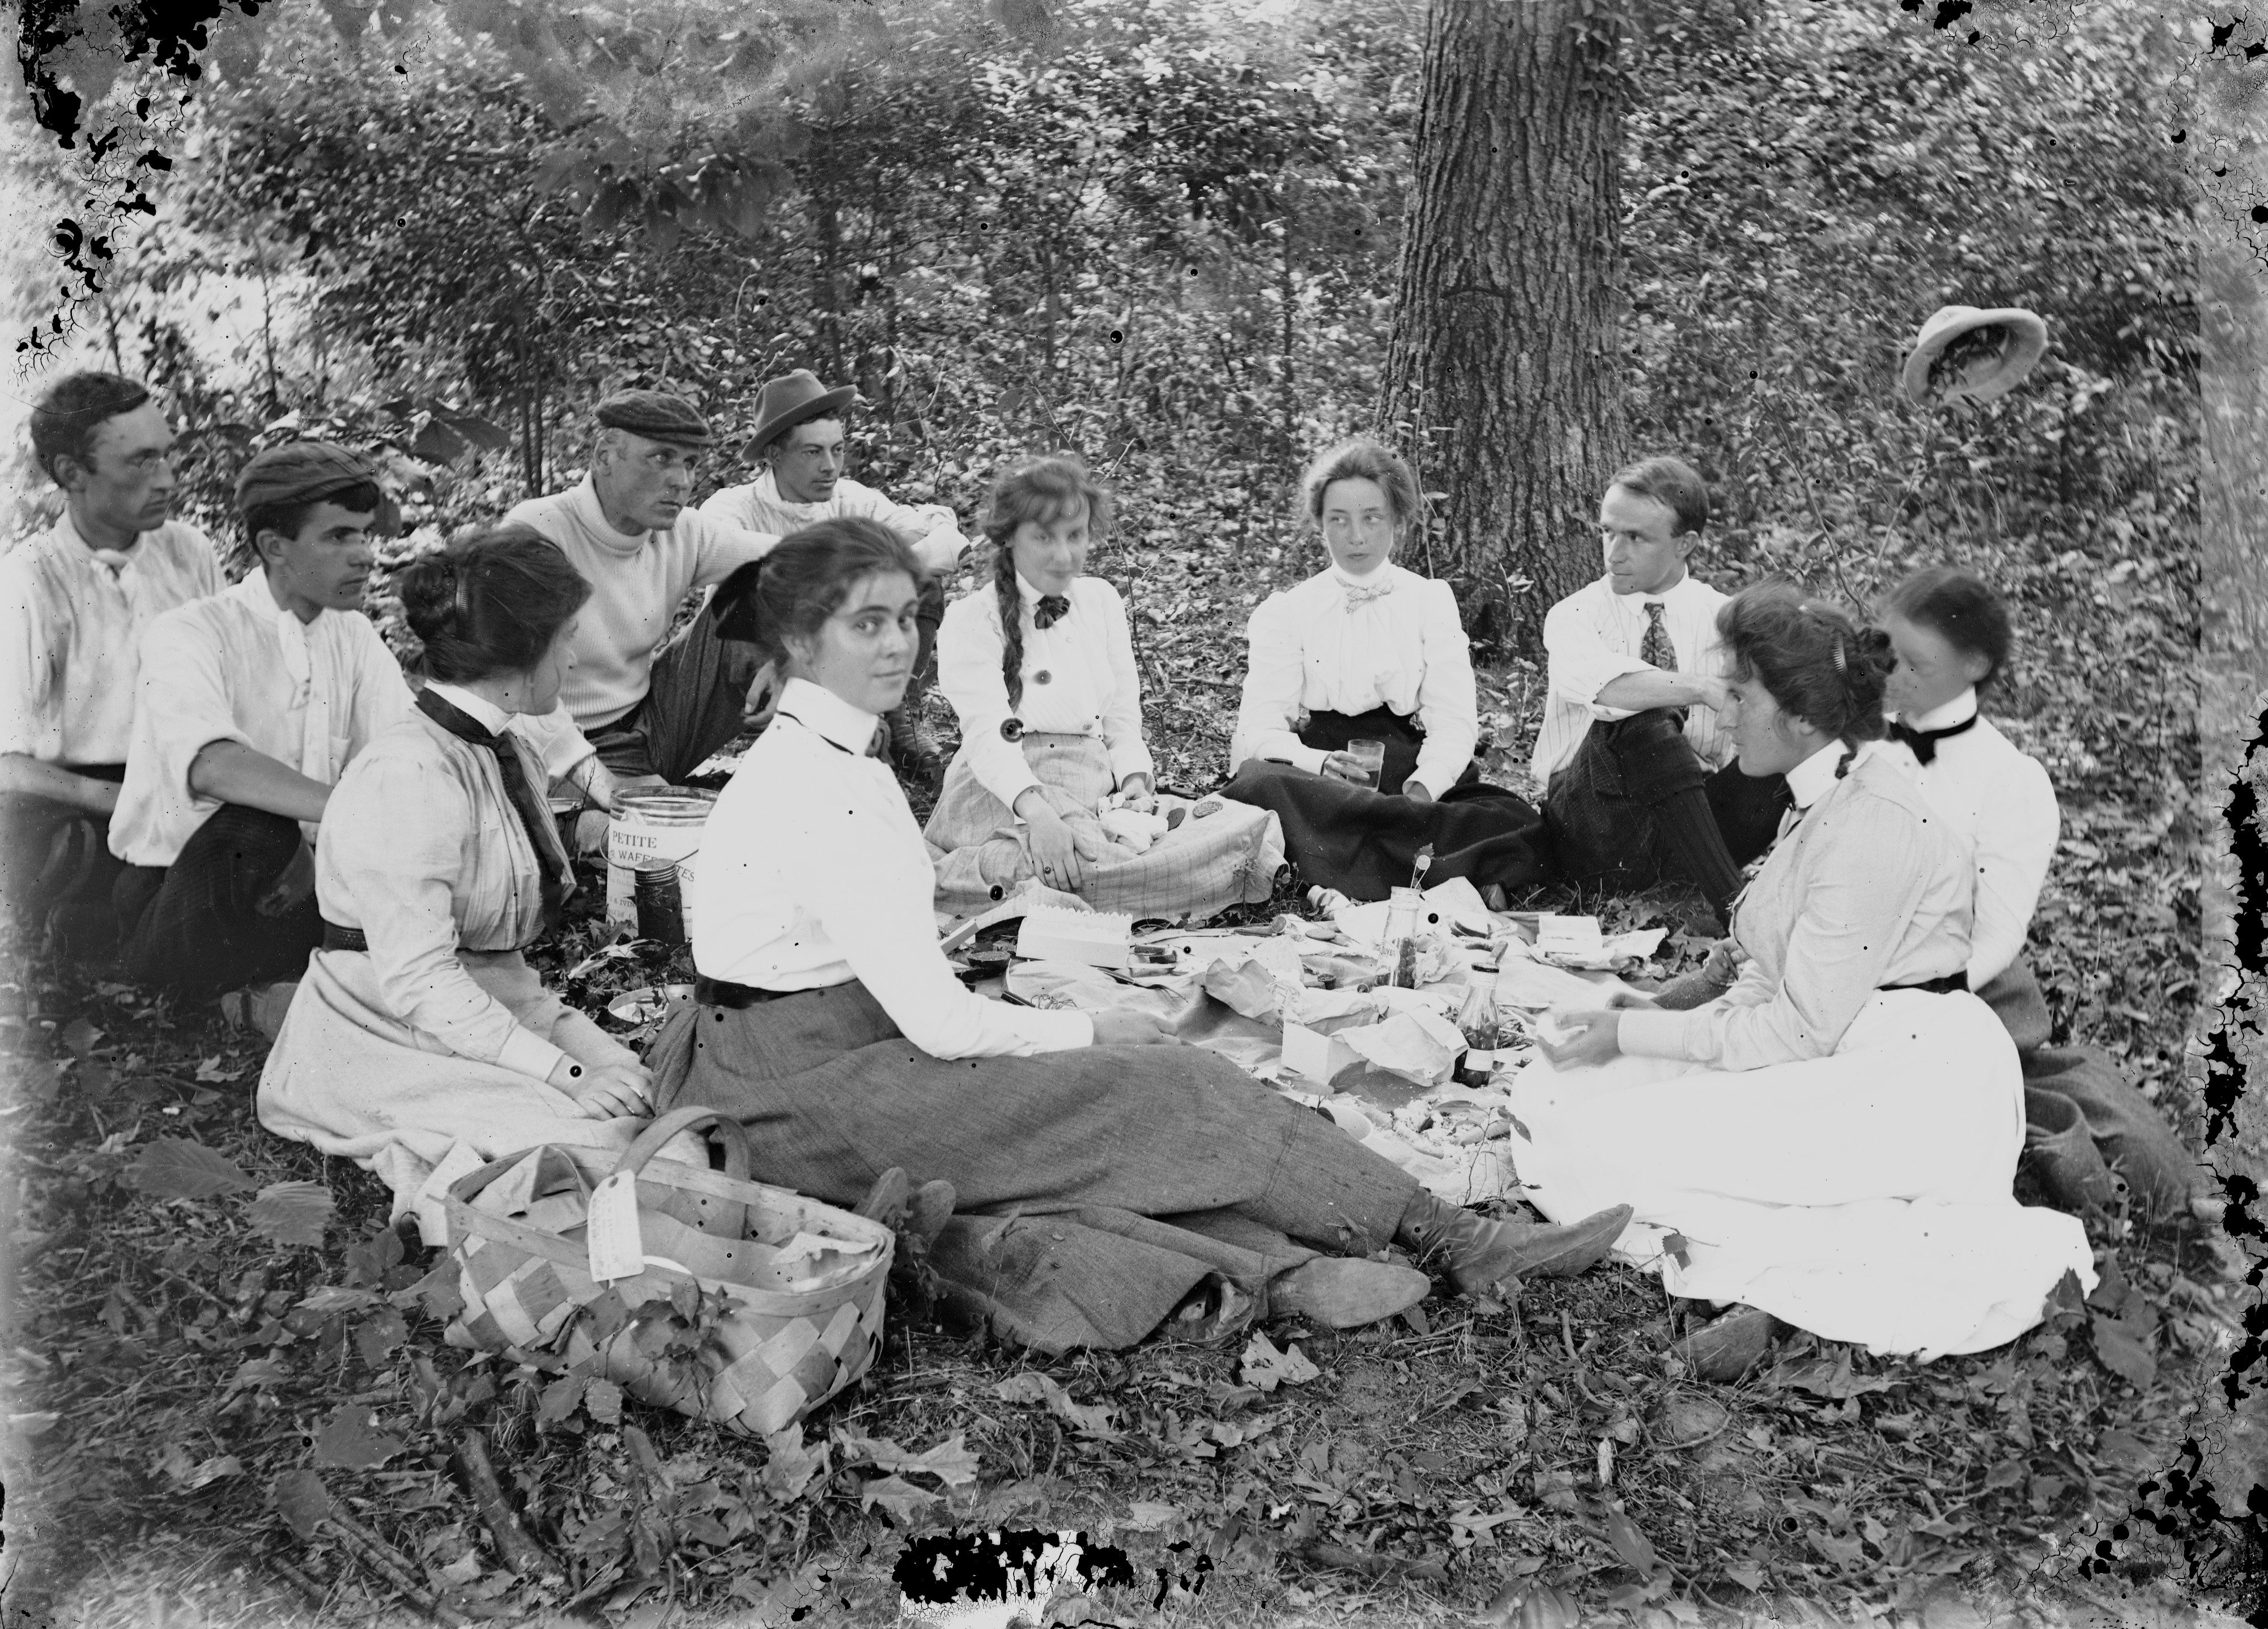 Black and white glass negative showing a group of young men and women having a picnic in the woods. An older man, artist Howard Pyle, is also present.